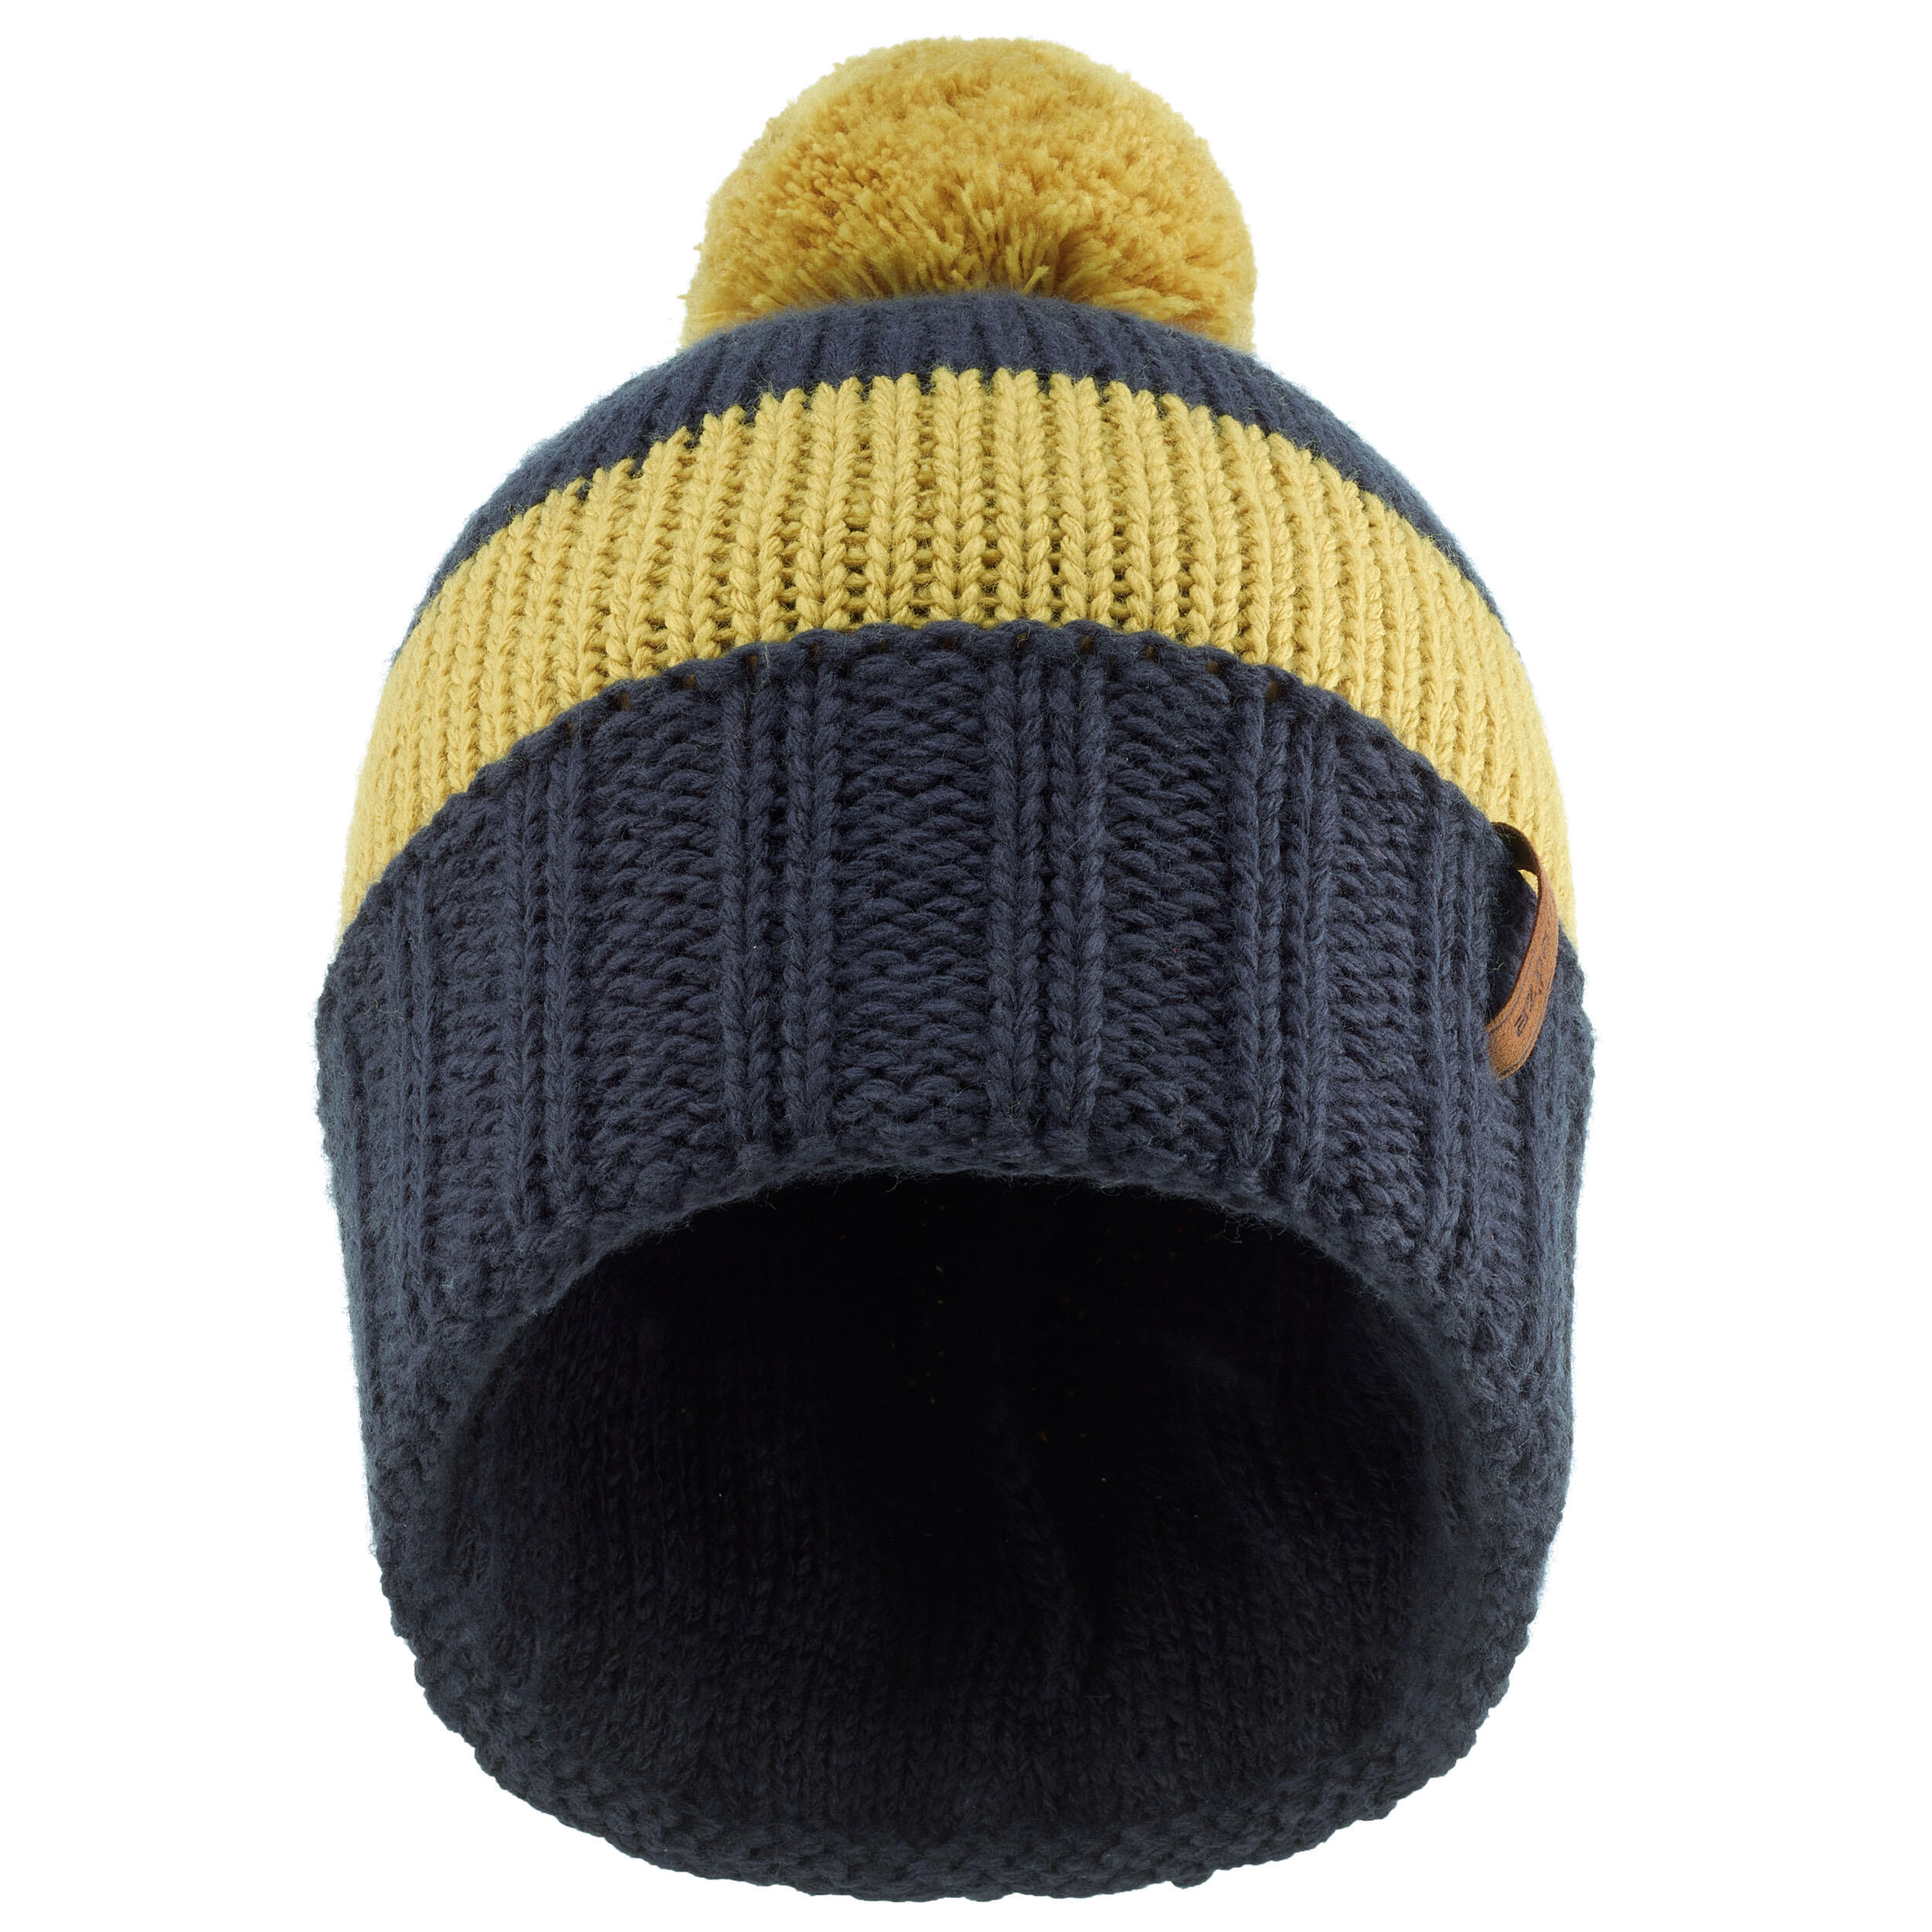 ADULT SKI HAT GRAND NORD MADE IN FRANCE NAVY BLUE-OCHRE 3/8